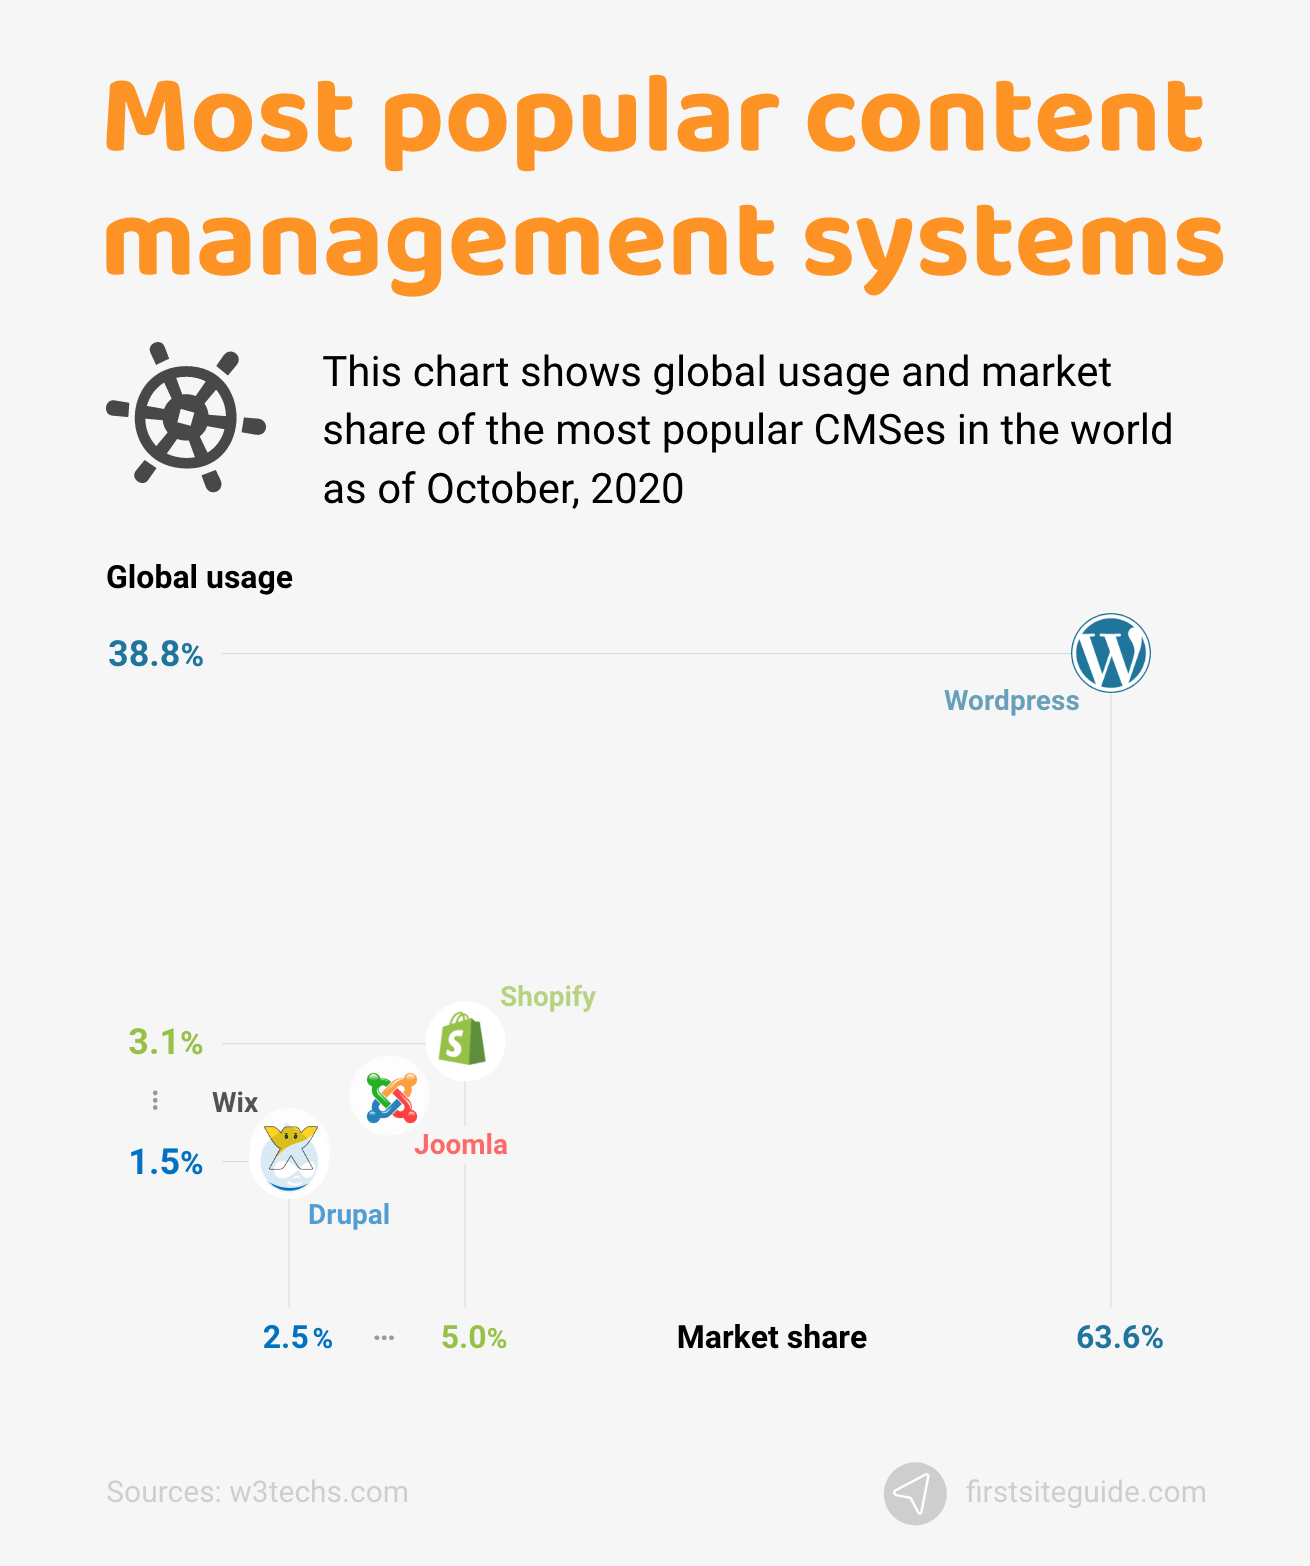 Most popular content management systems